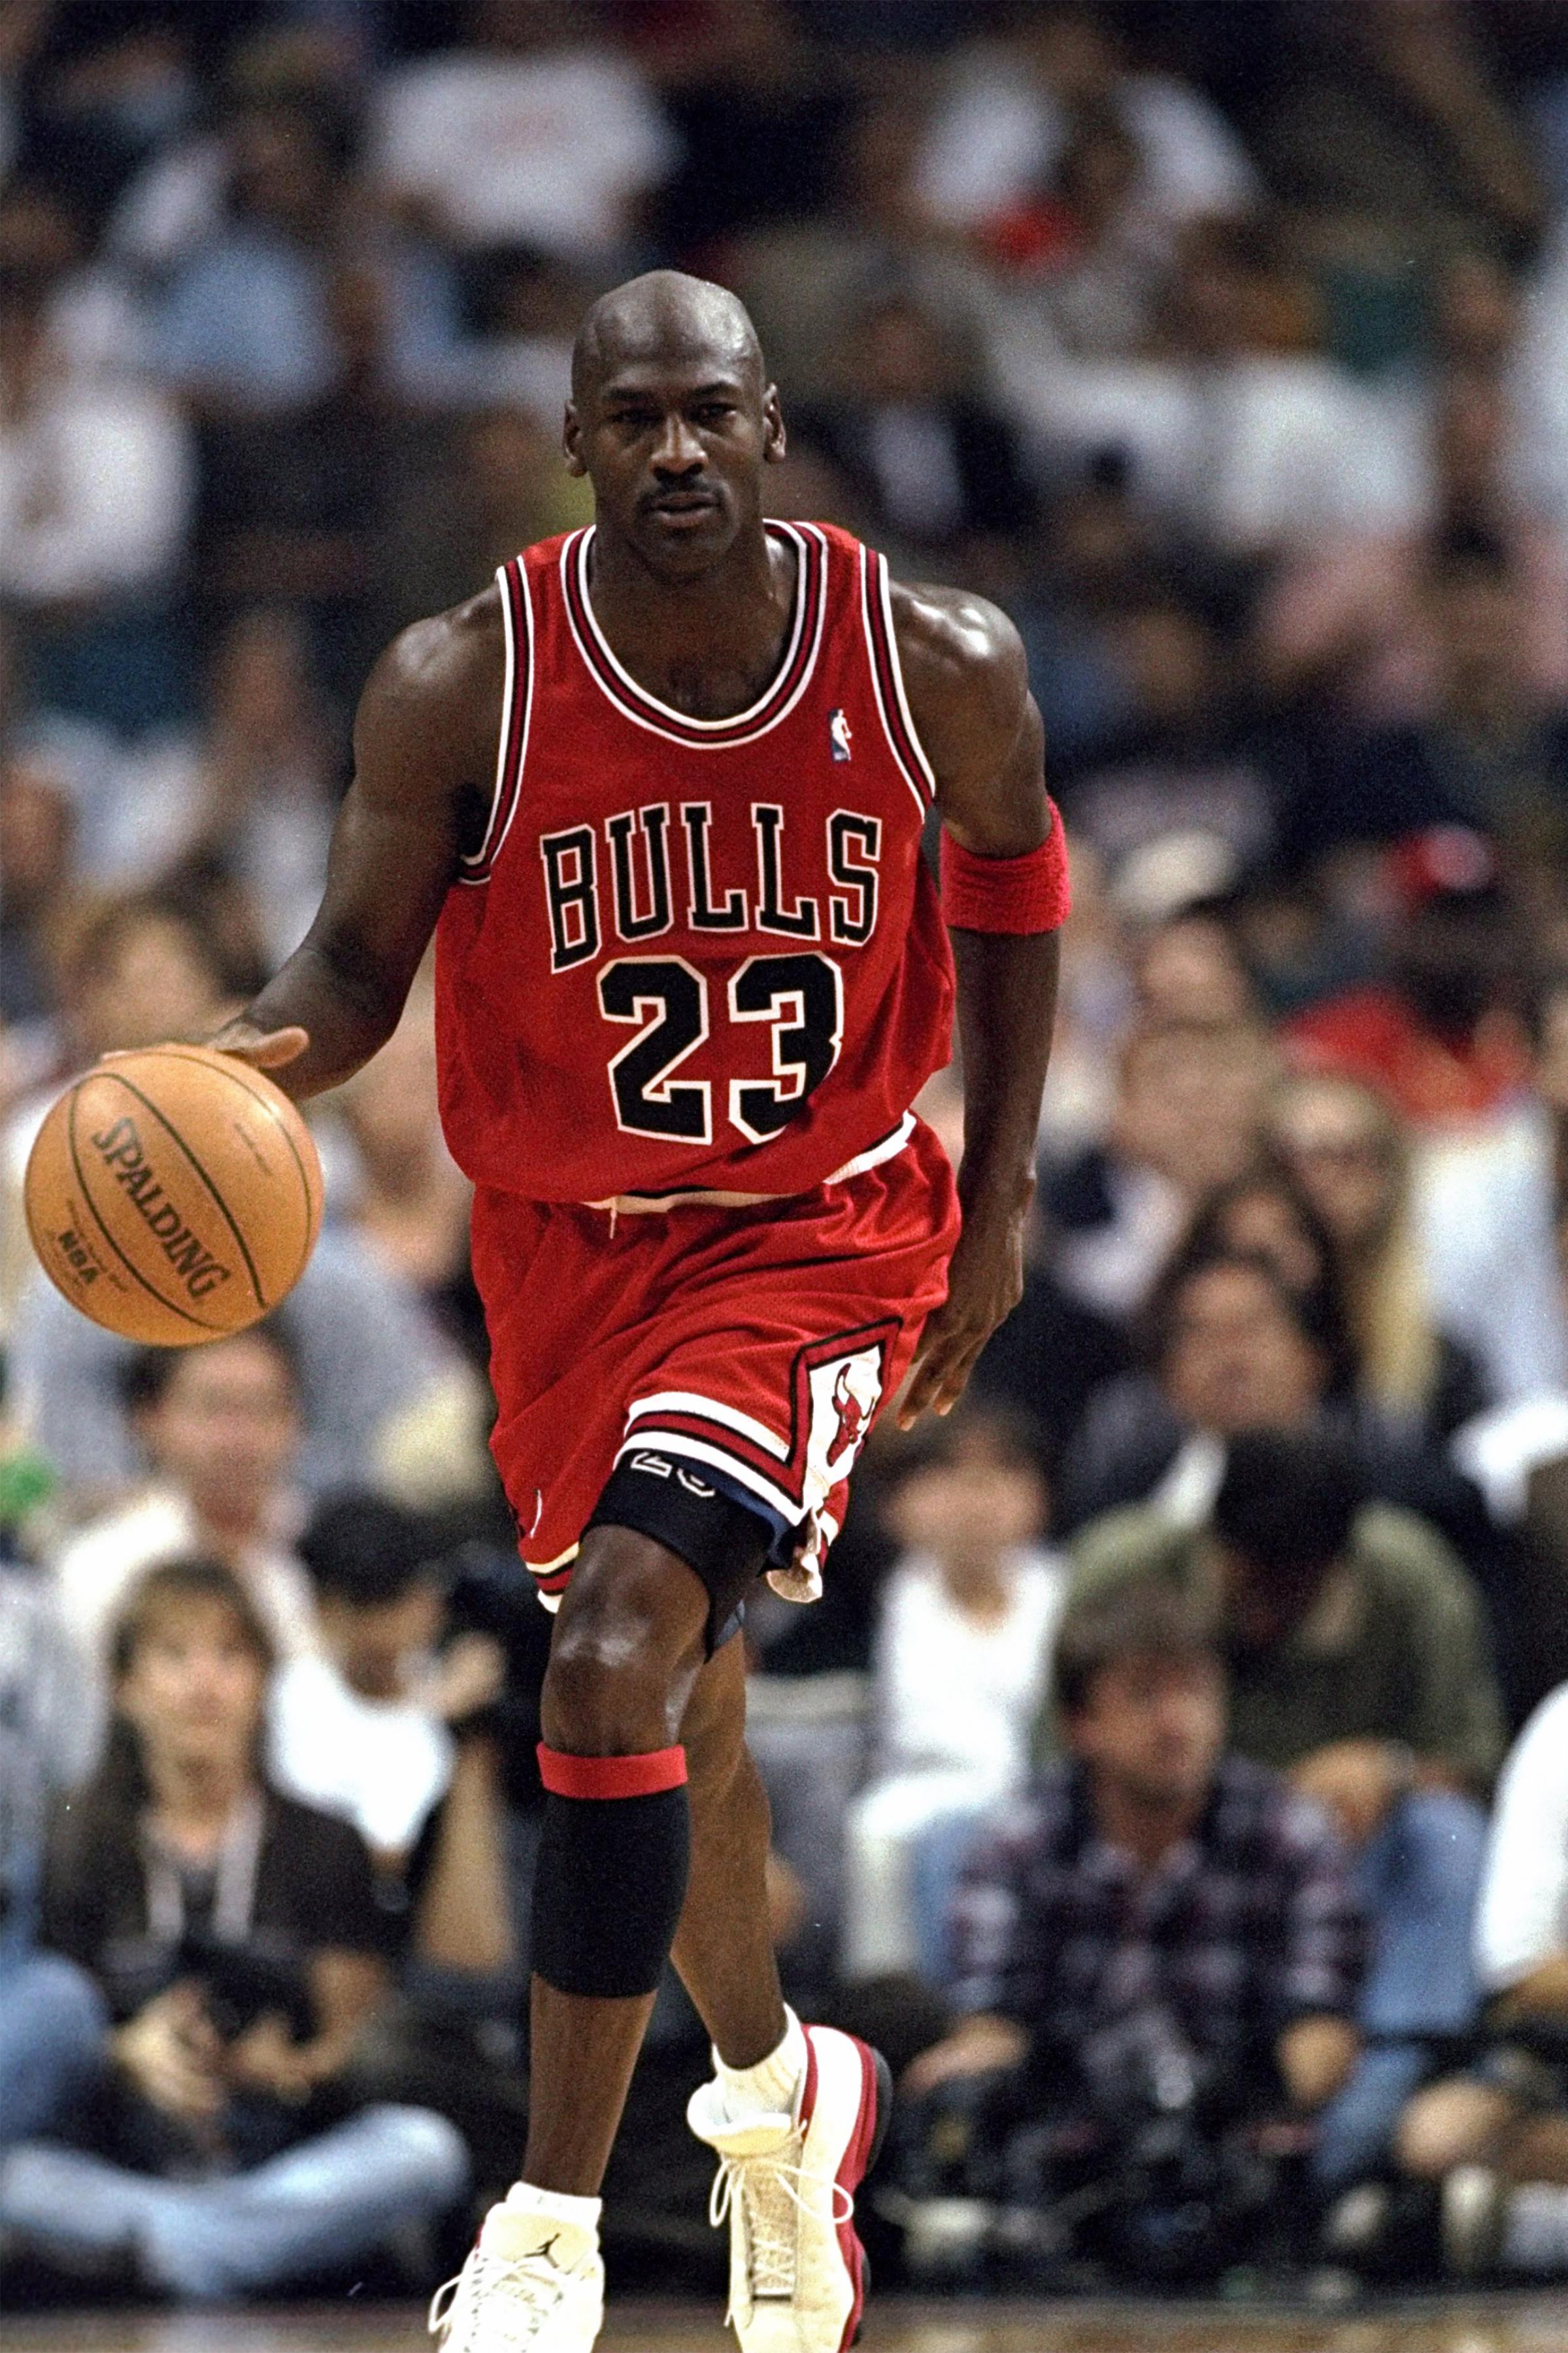 Michael Jordan of the Chicago Bulls in action against the Miami Heat